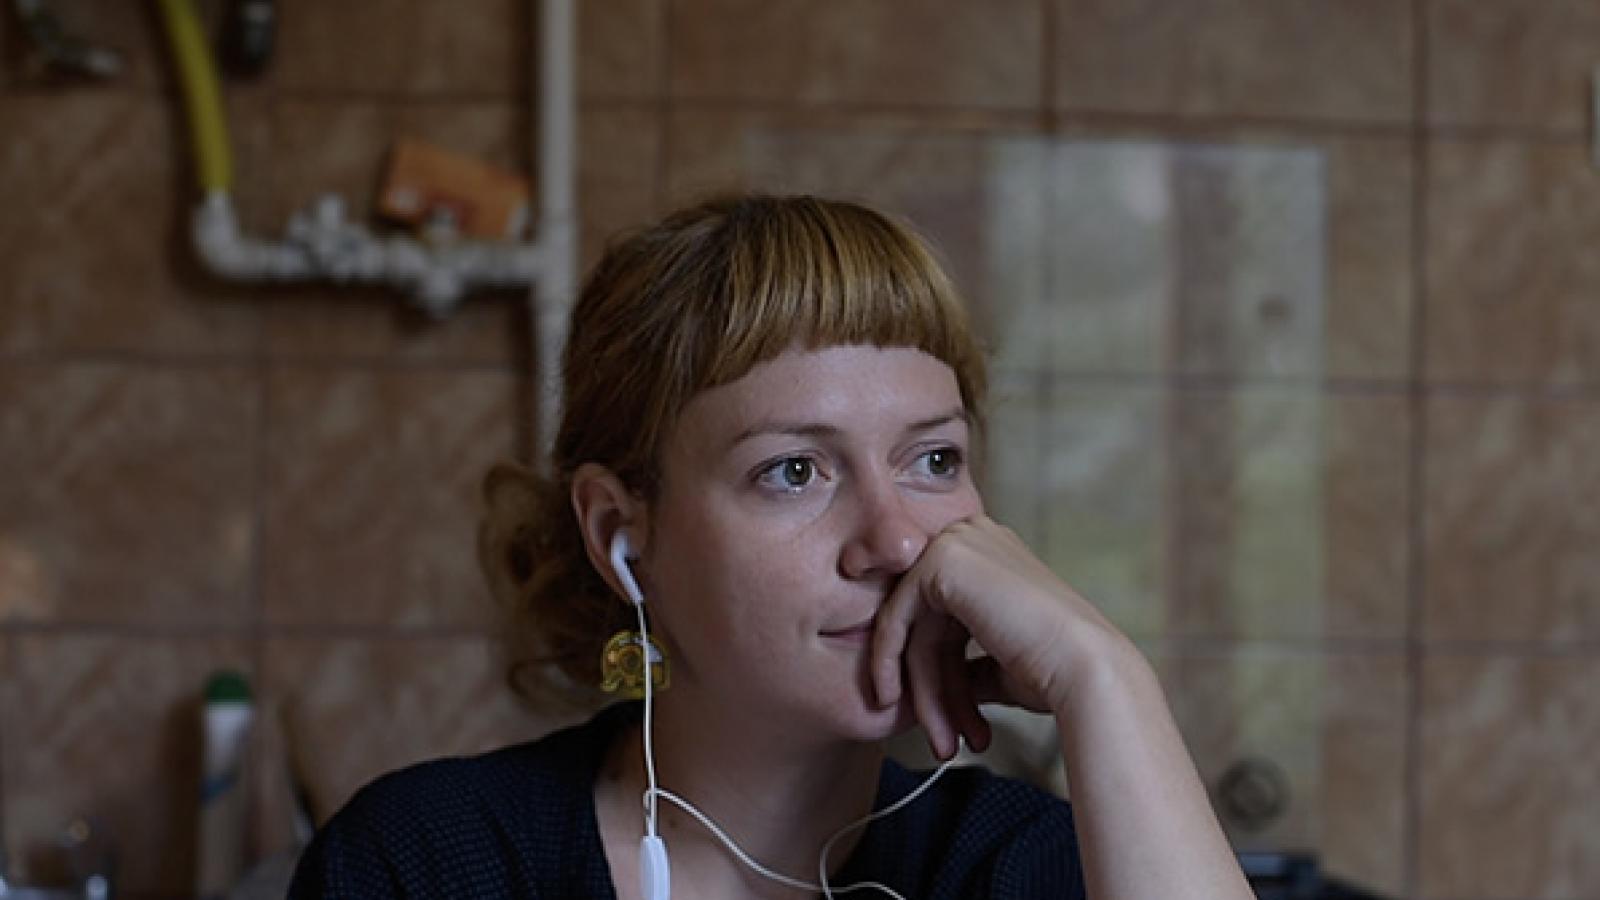 A young woman with earbuds in and resting her face on her hand.